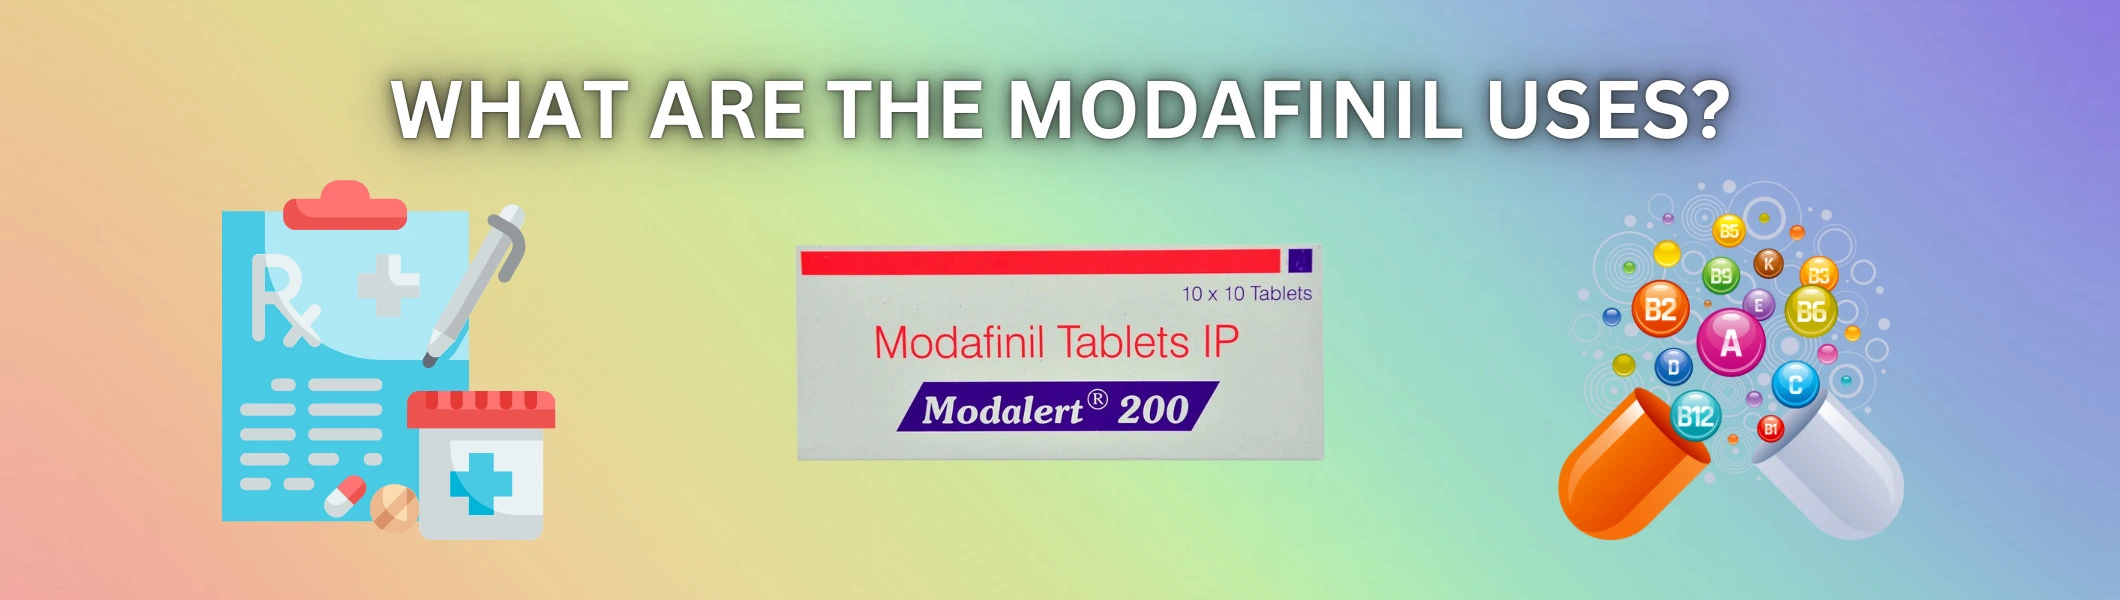 what-are-the-modafinal-uses